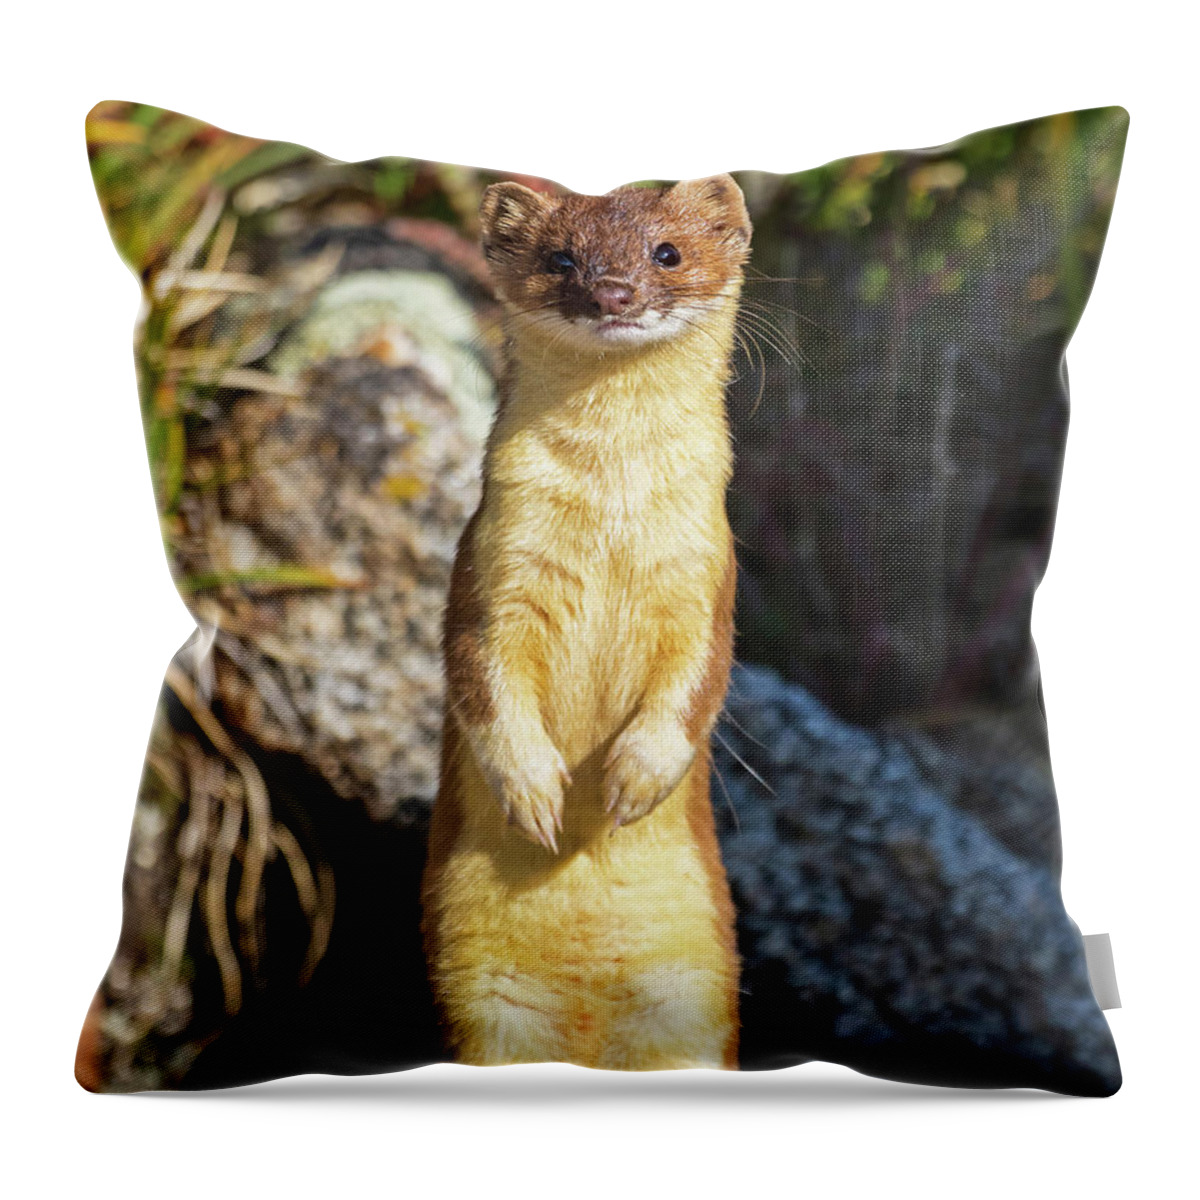 Long-tailed Weasel Throw Pillow featuring the photograph Alpine Tundra Weasel #3 by Mindy Musick King